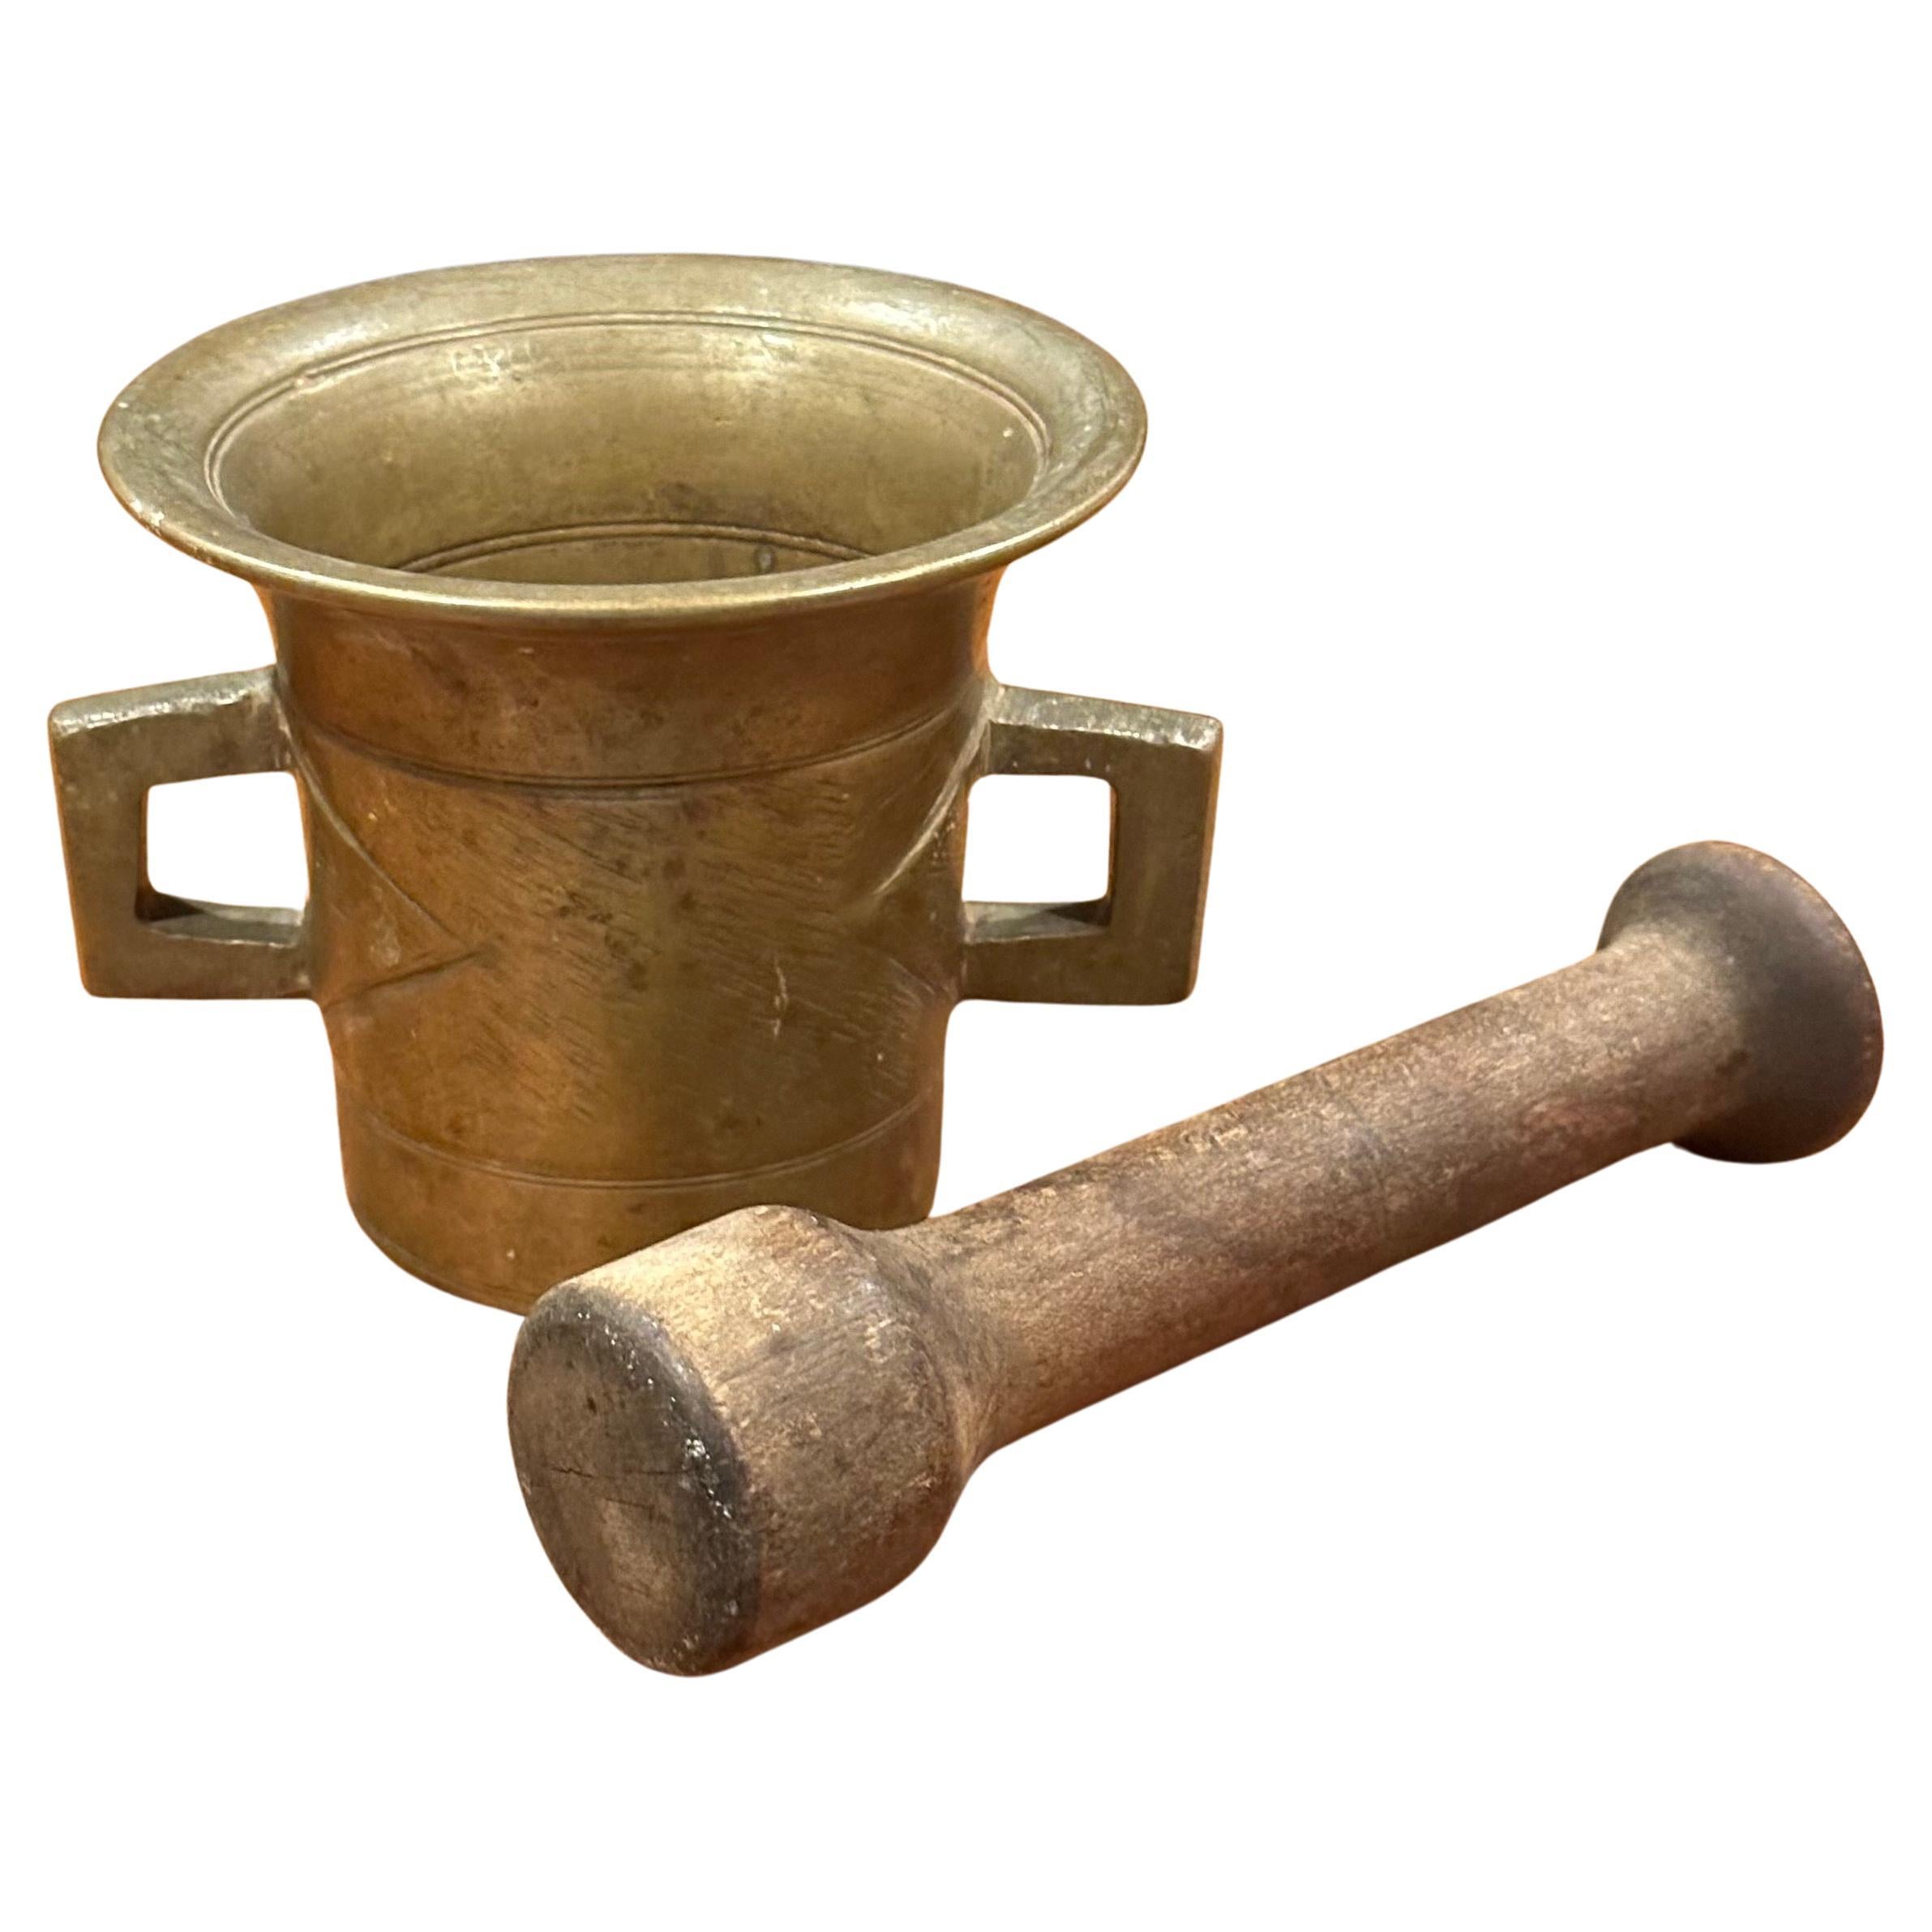 A nice vintage apothecary bronze mortar and wood pestle, circa 1950s.  The piece is in good vintage condition with a nice patina and measures 5